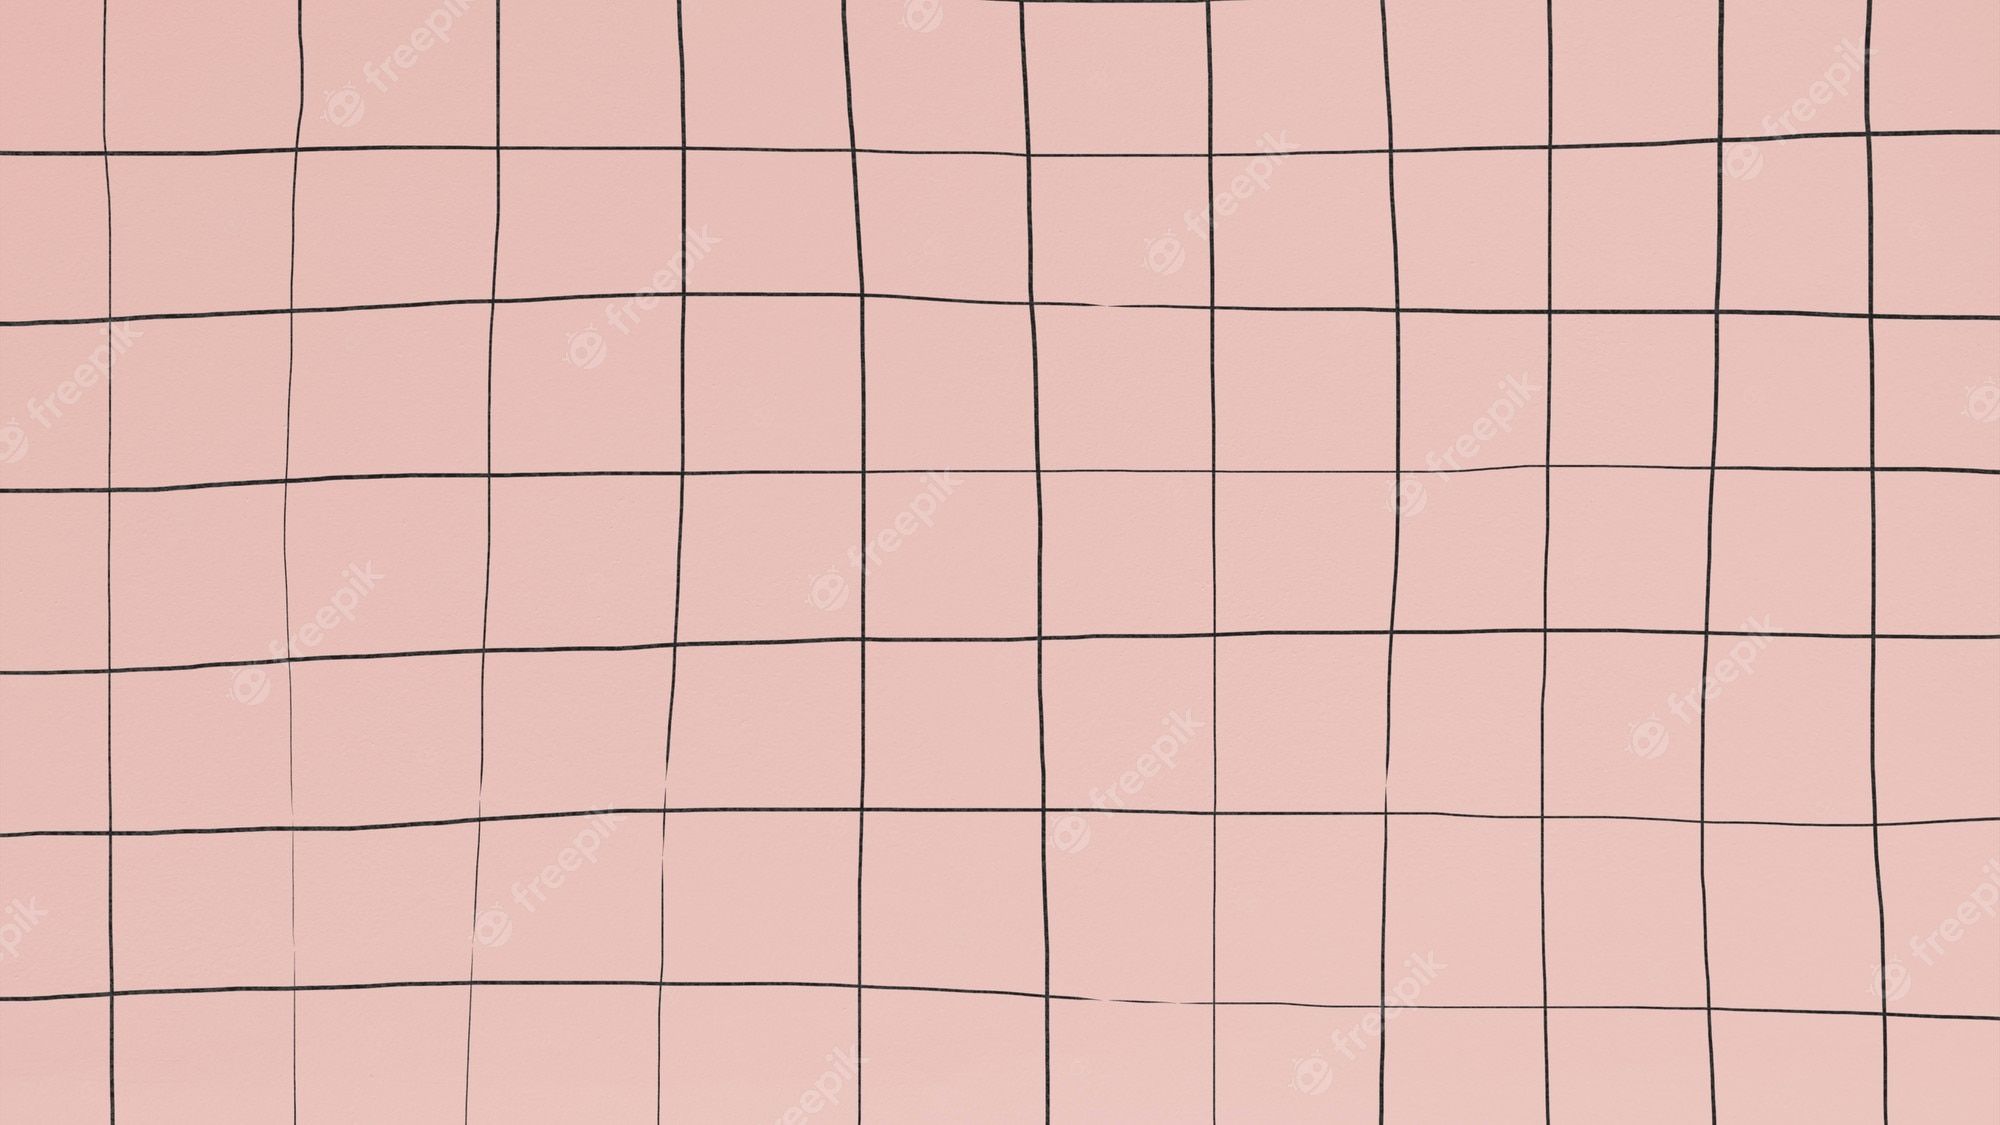 A pink background with black lines - Grid